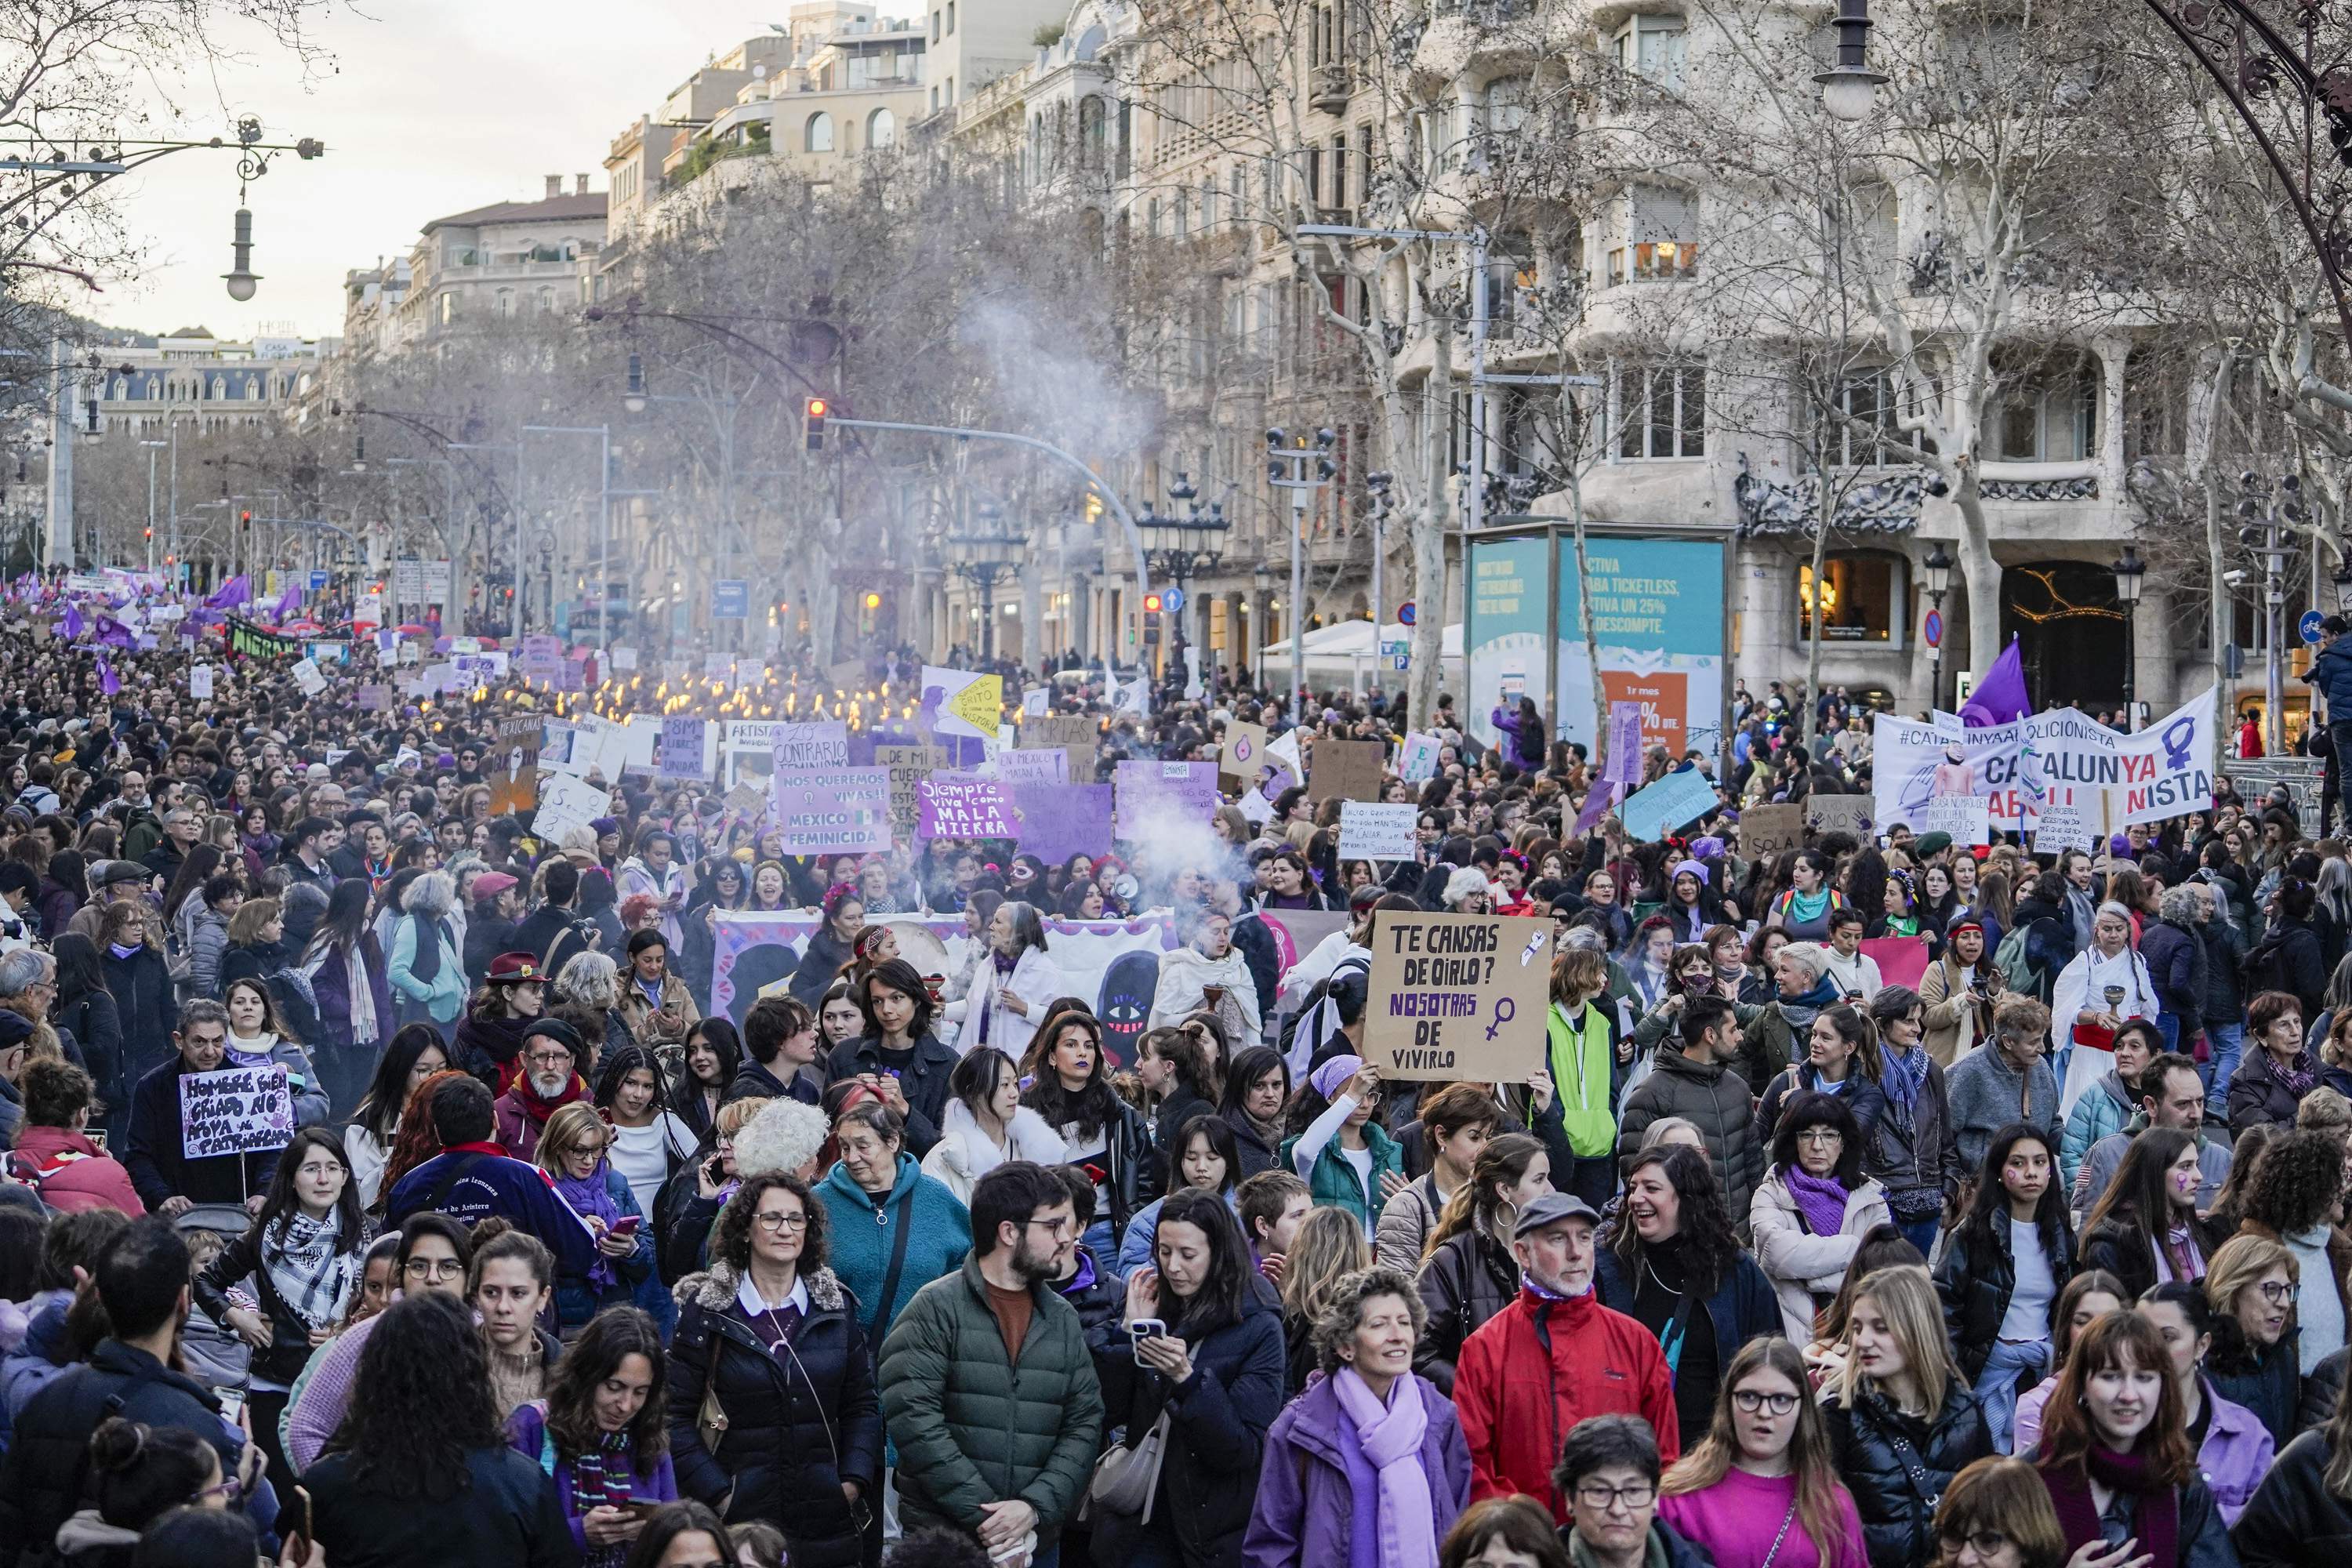 Thousands of women stand up to sexism once again as the '8-M' takes the streets of Barcelona